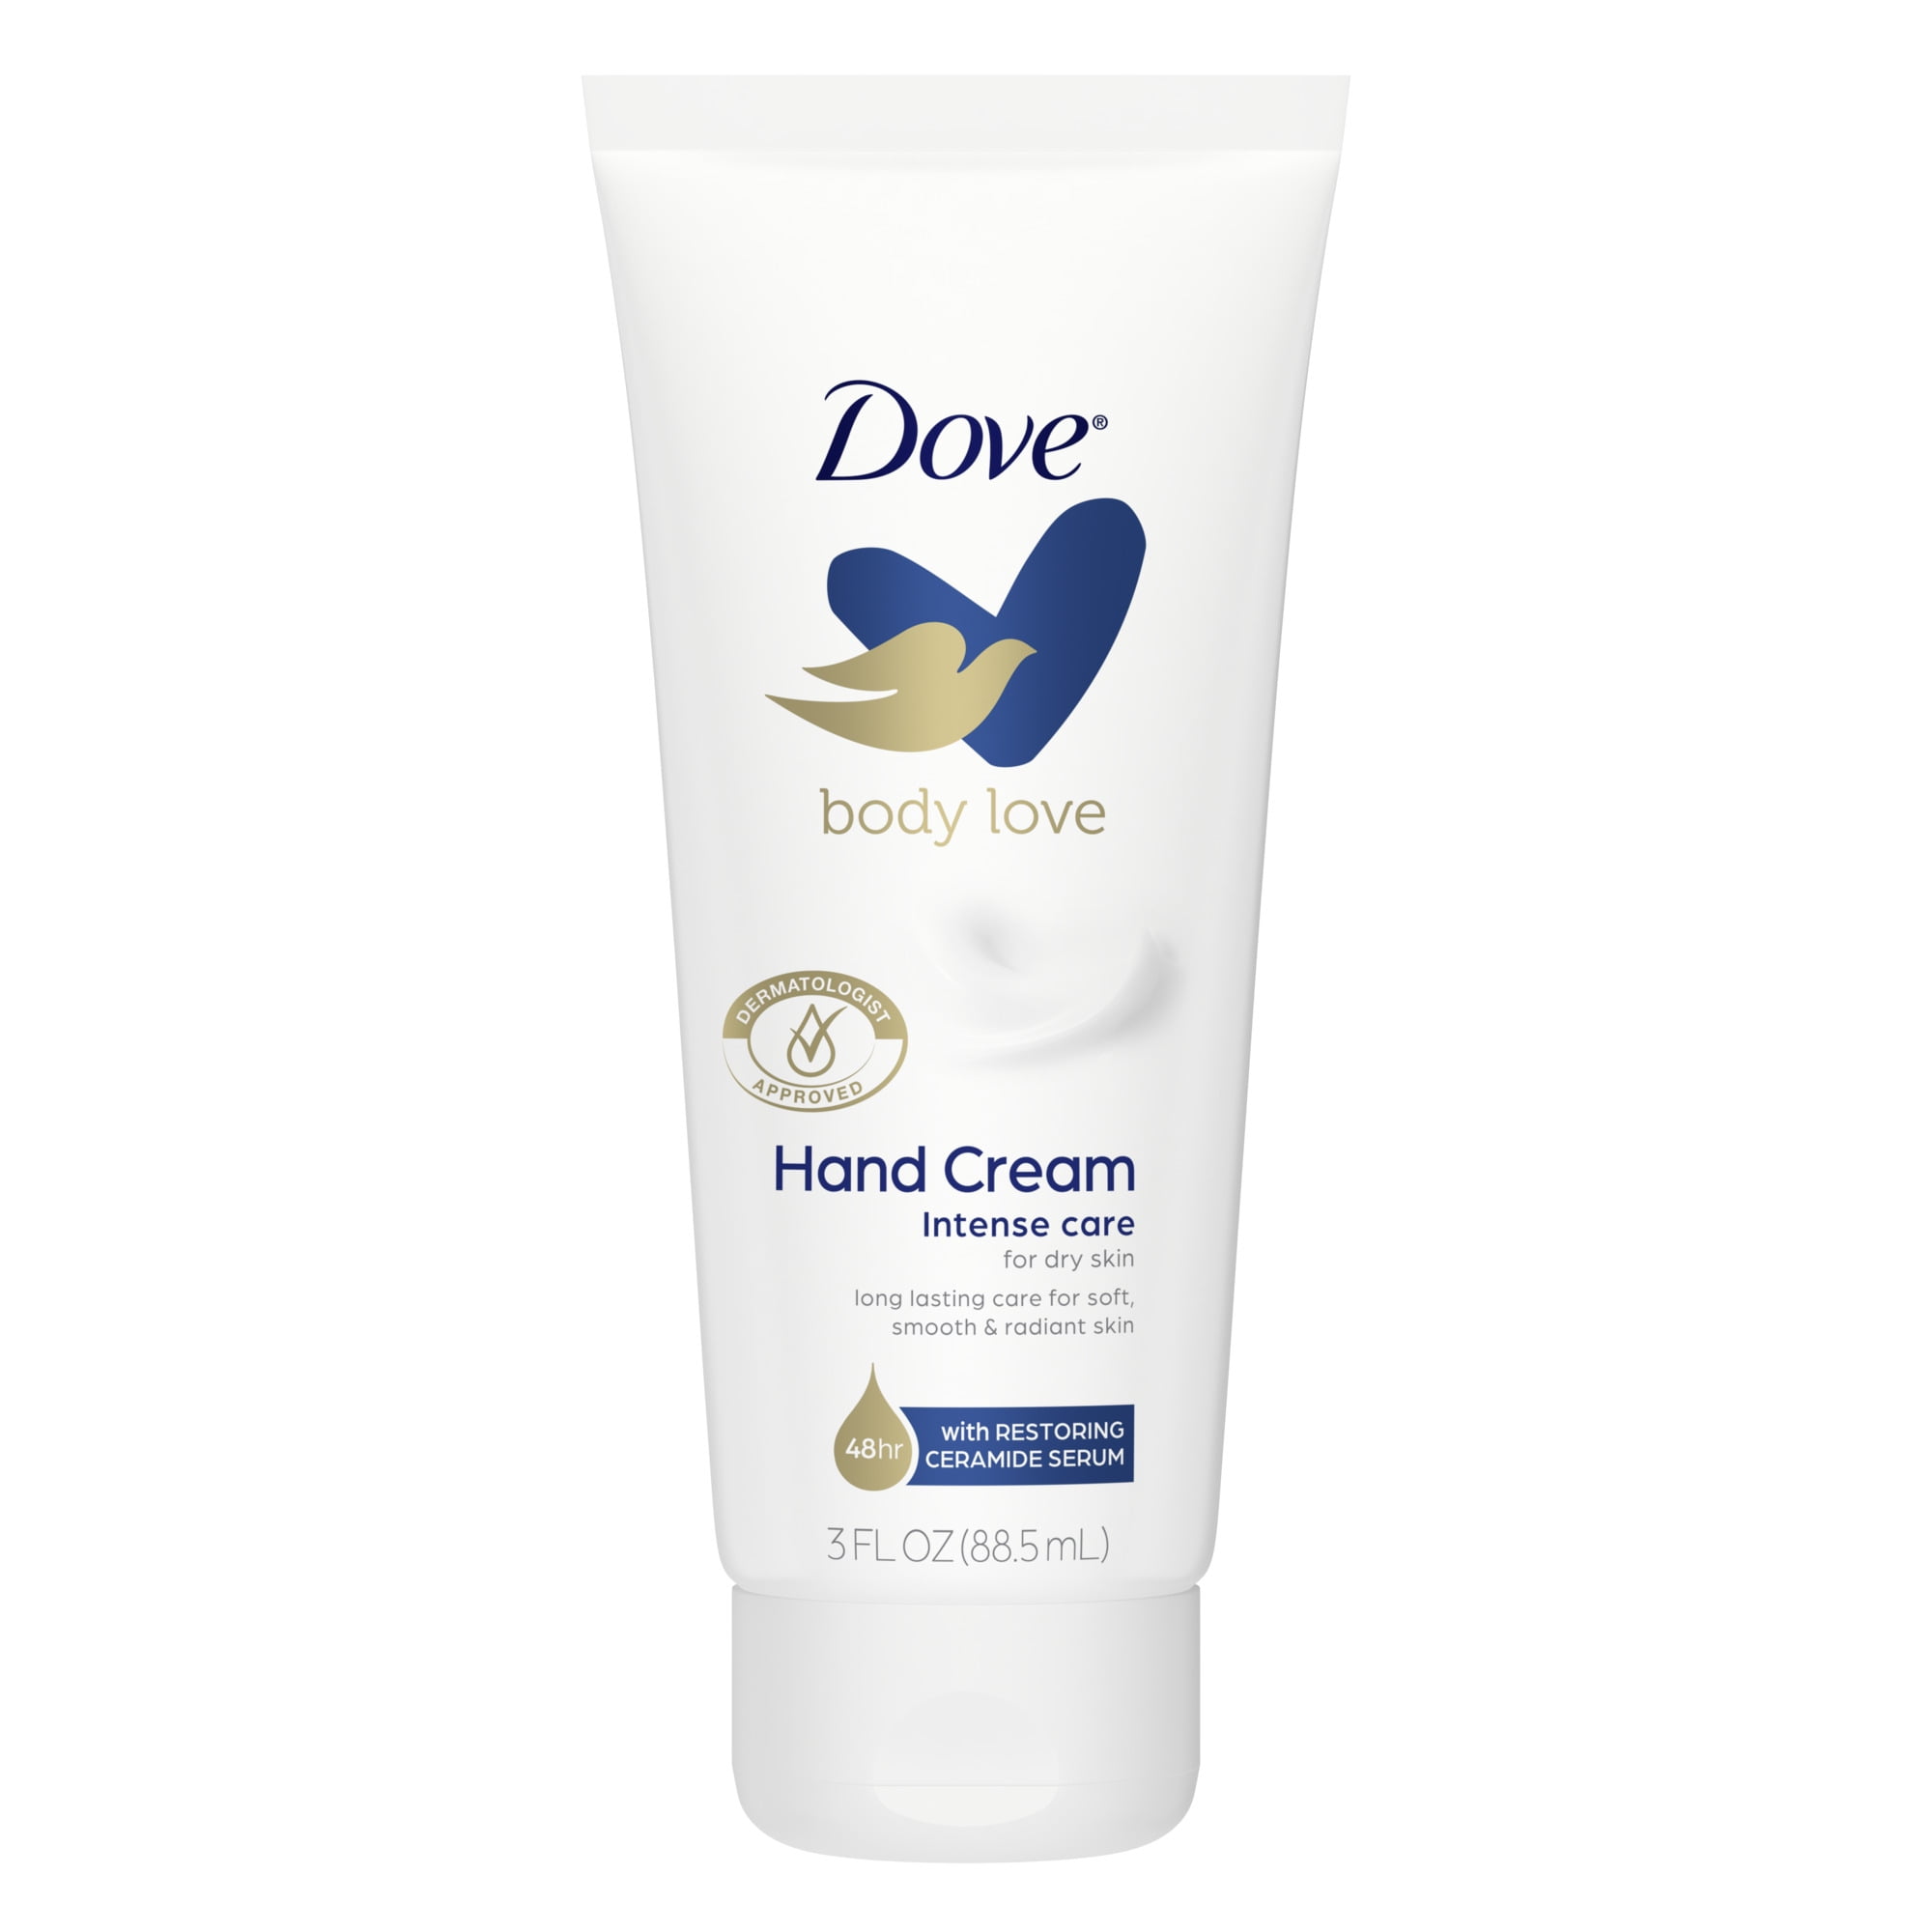 Dove Body Love Moisturizing Hand Cream for Rough or Dry Skin Intense Care Softens and Smoothes oz - Walmart.com